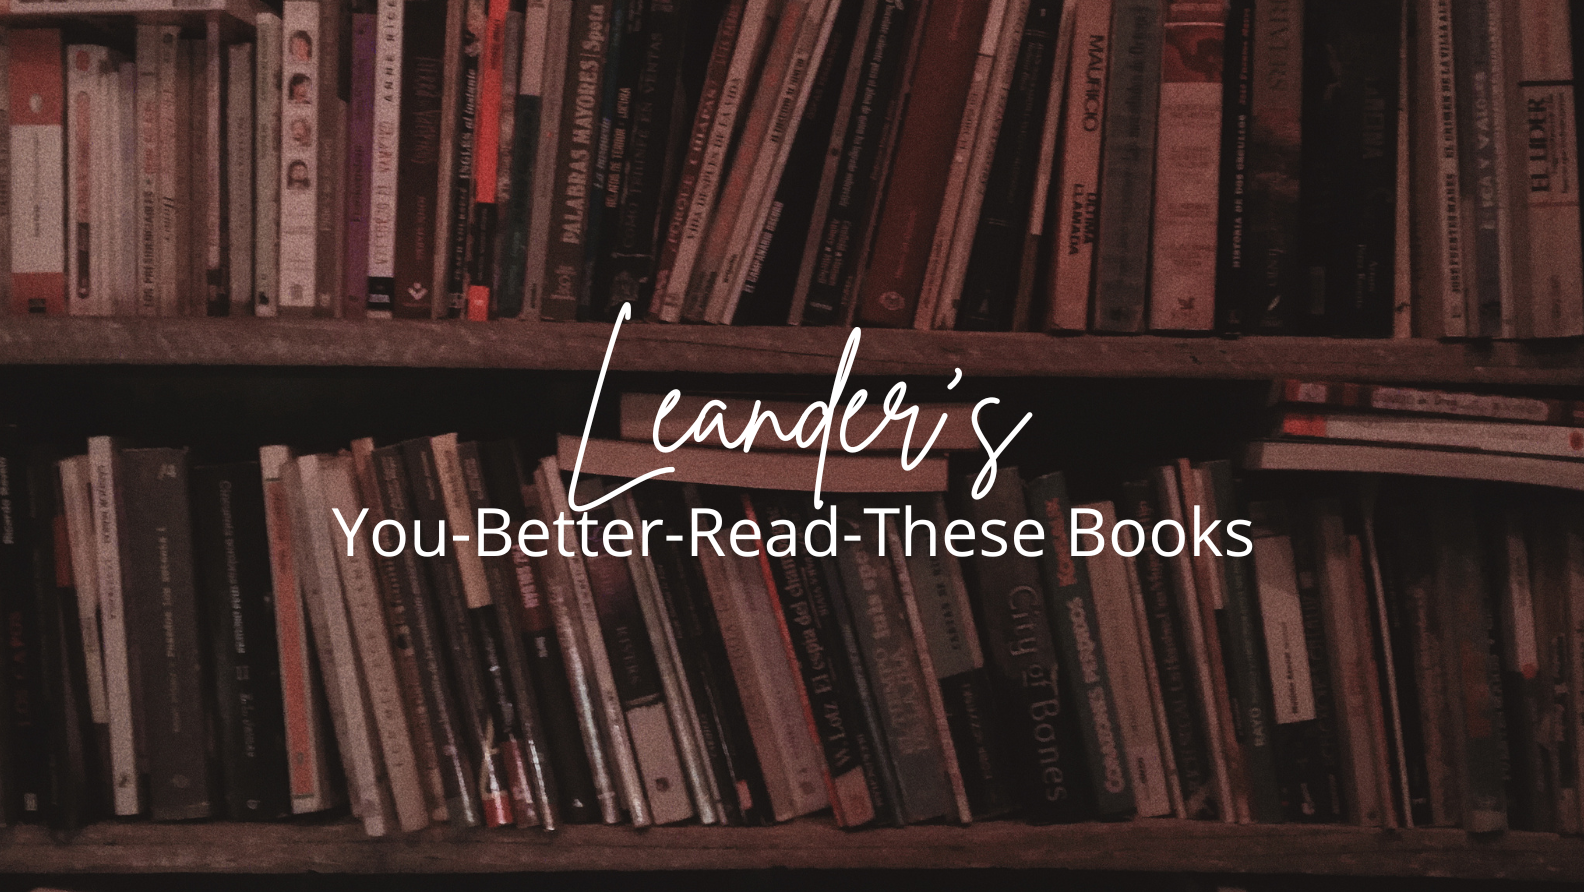 Leander's You-Better-Read-These-Books | Vol 006 [END - Peeves]